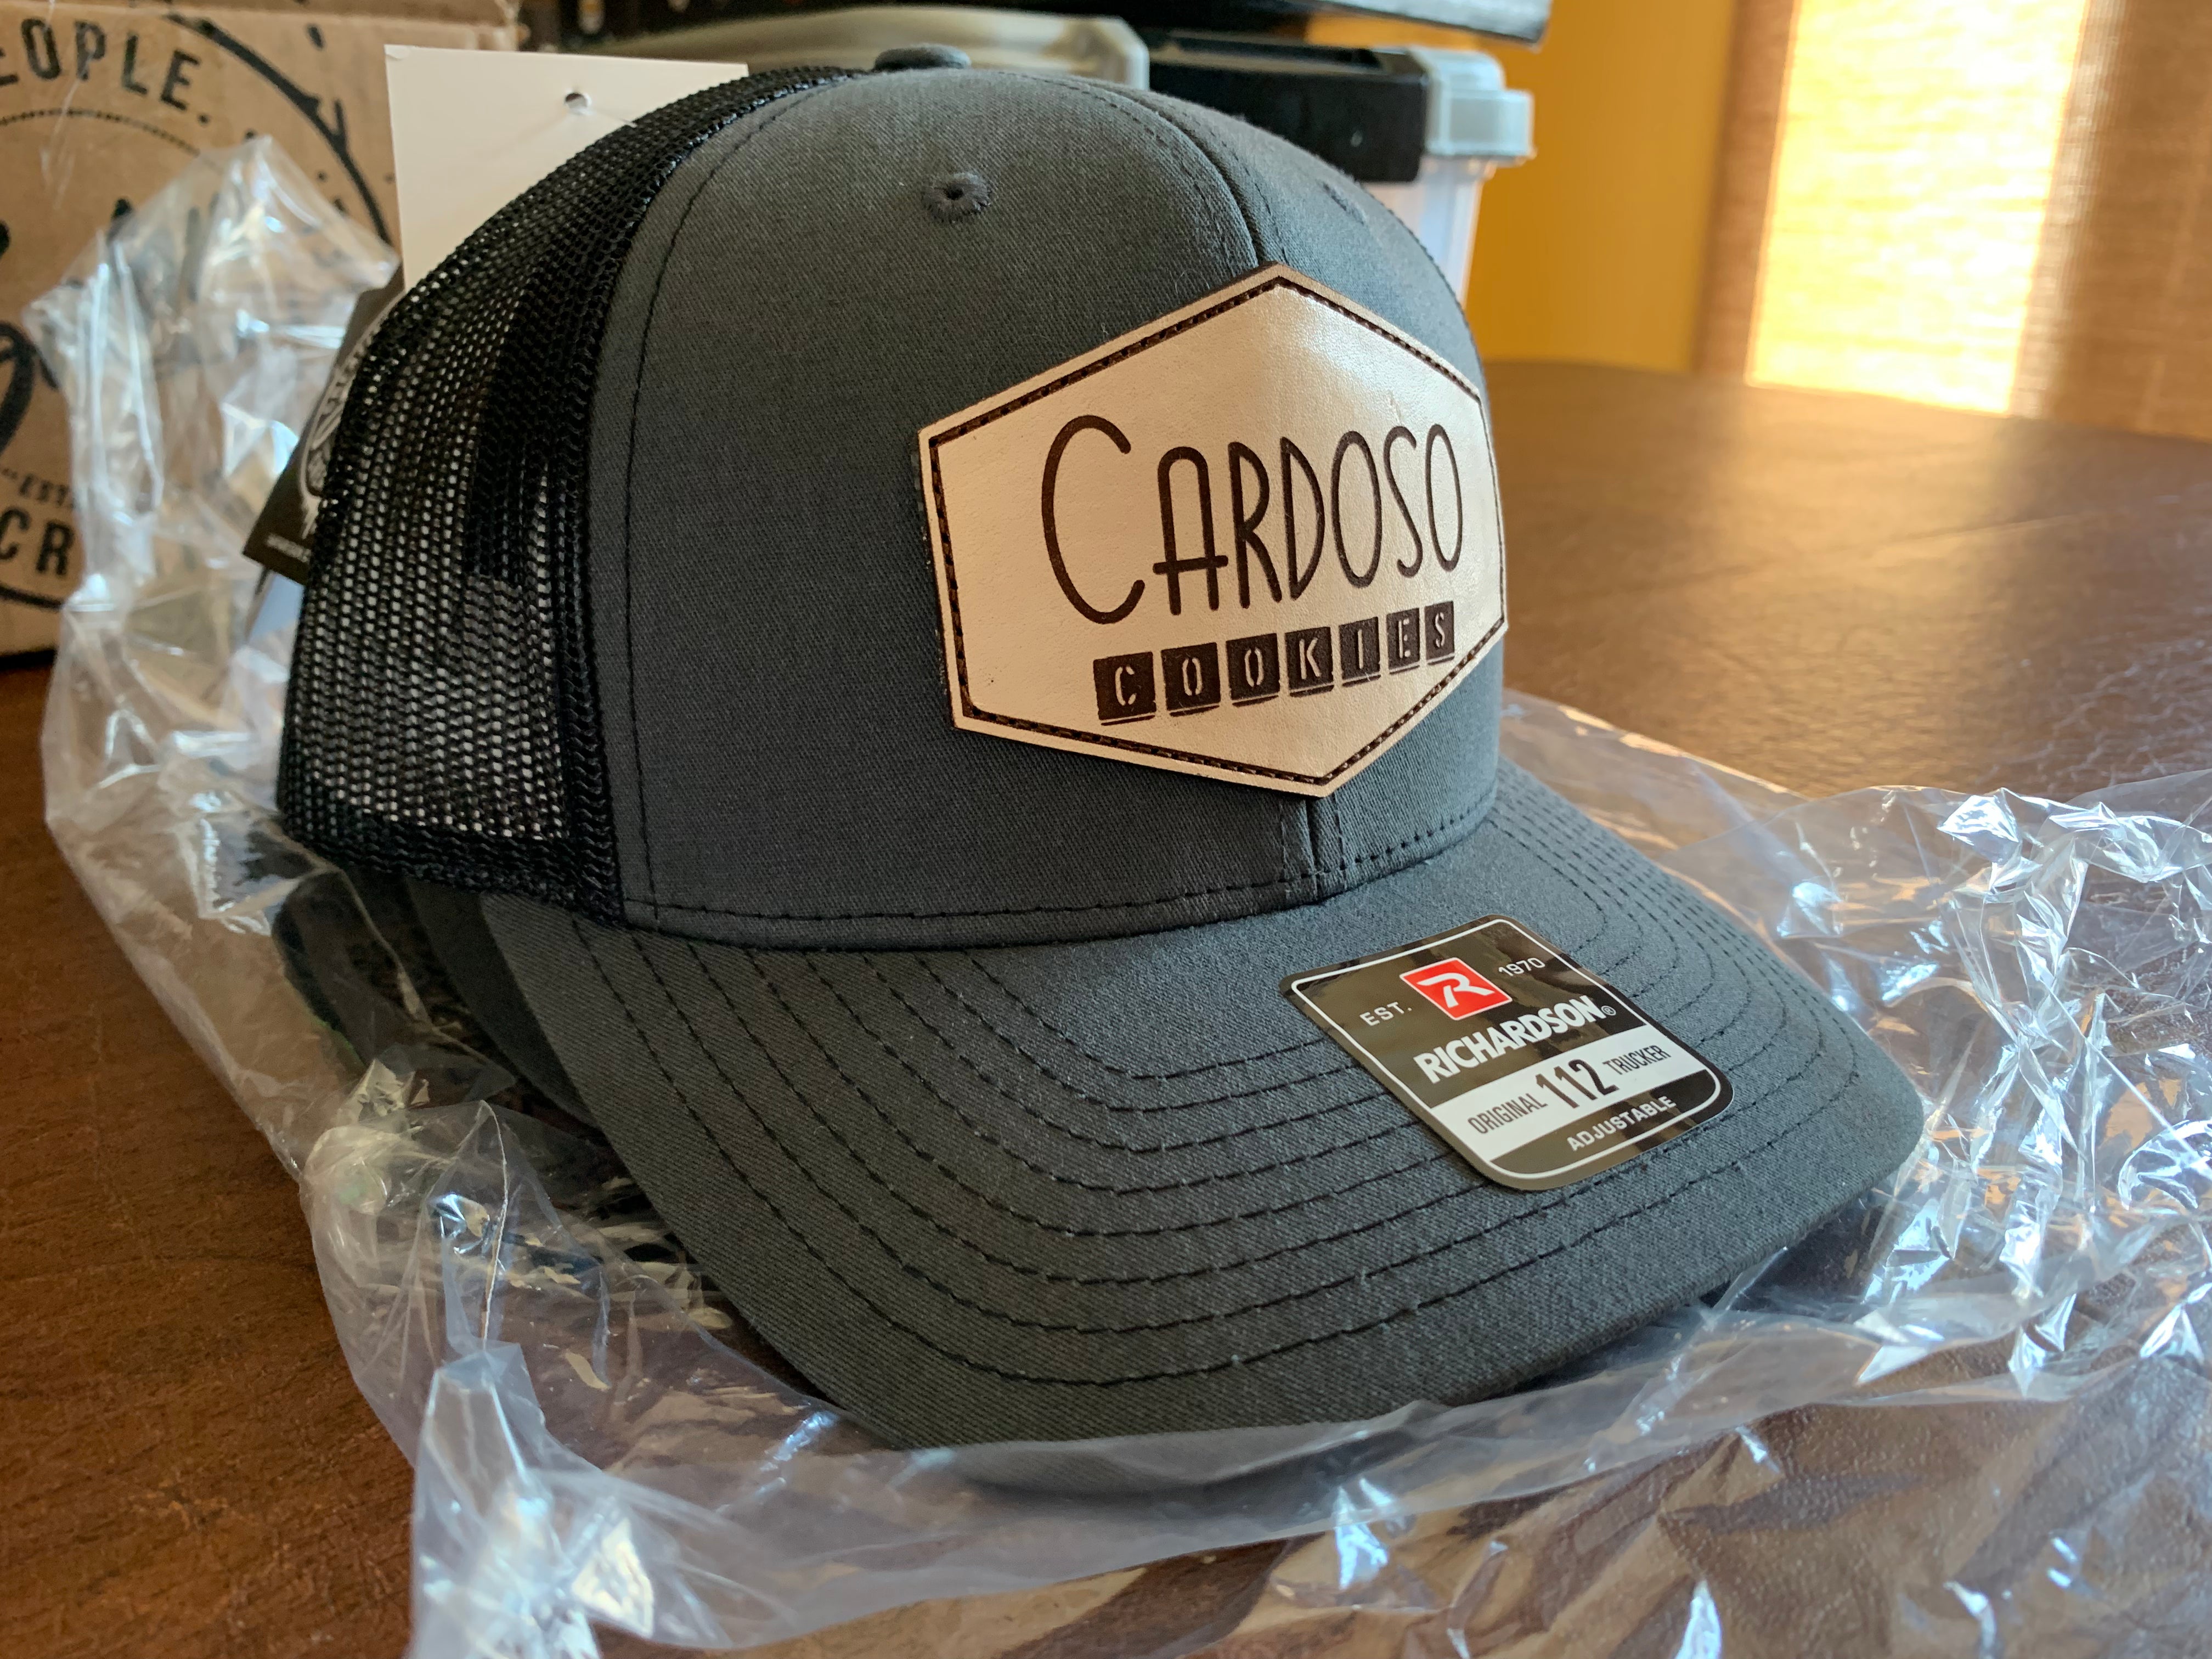 Cardoso Cookies Leather Patch Snap Back Hat